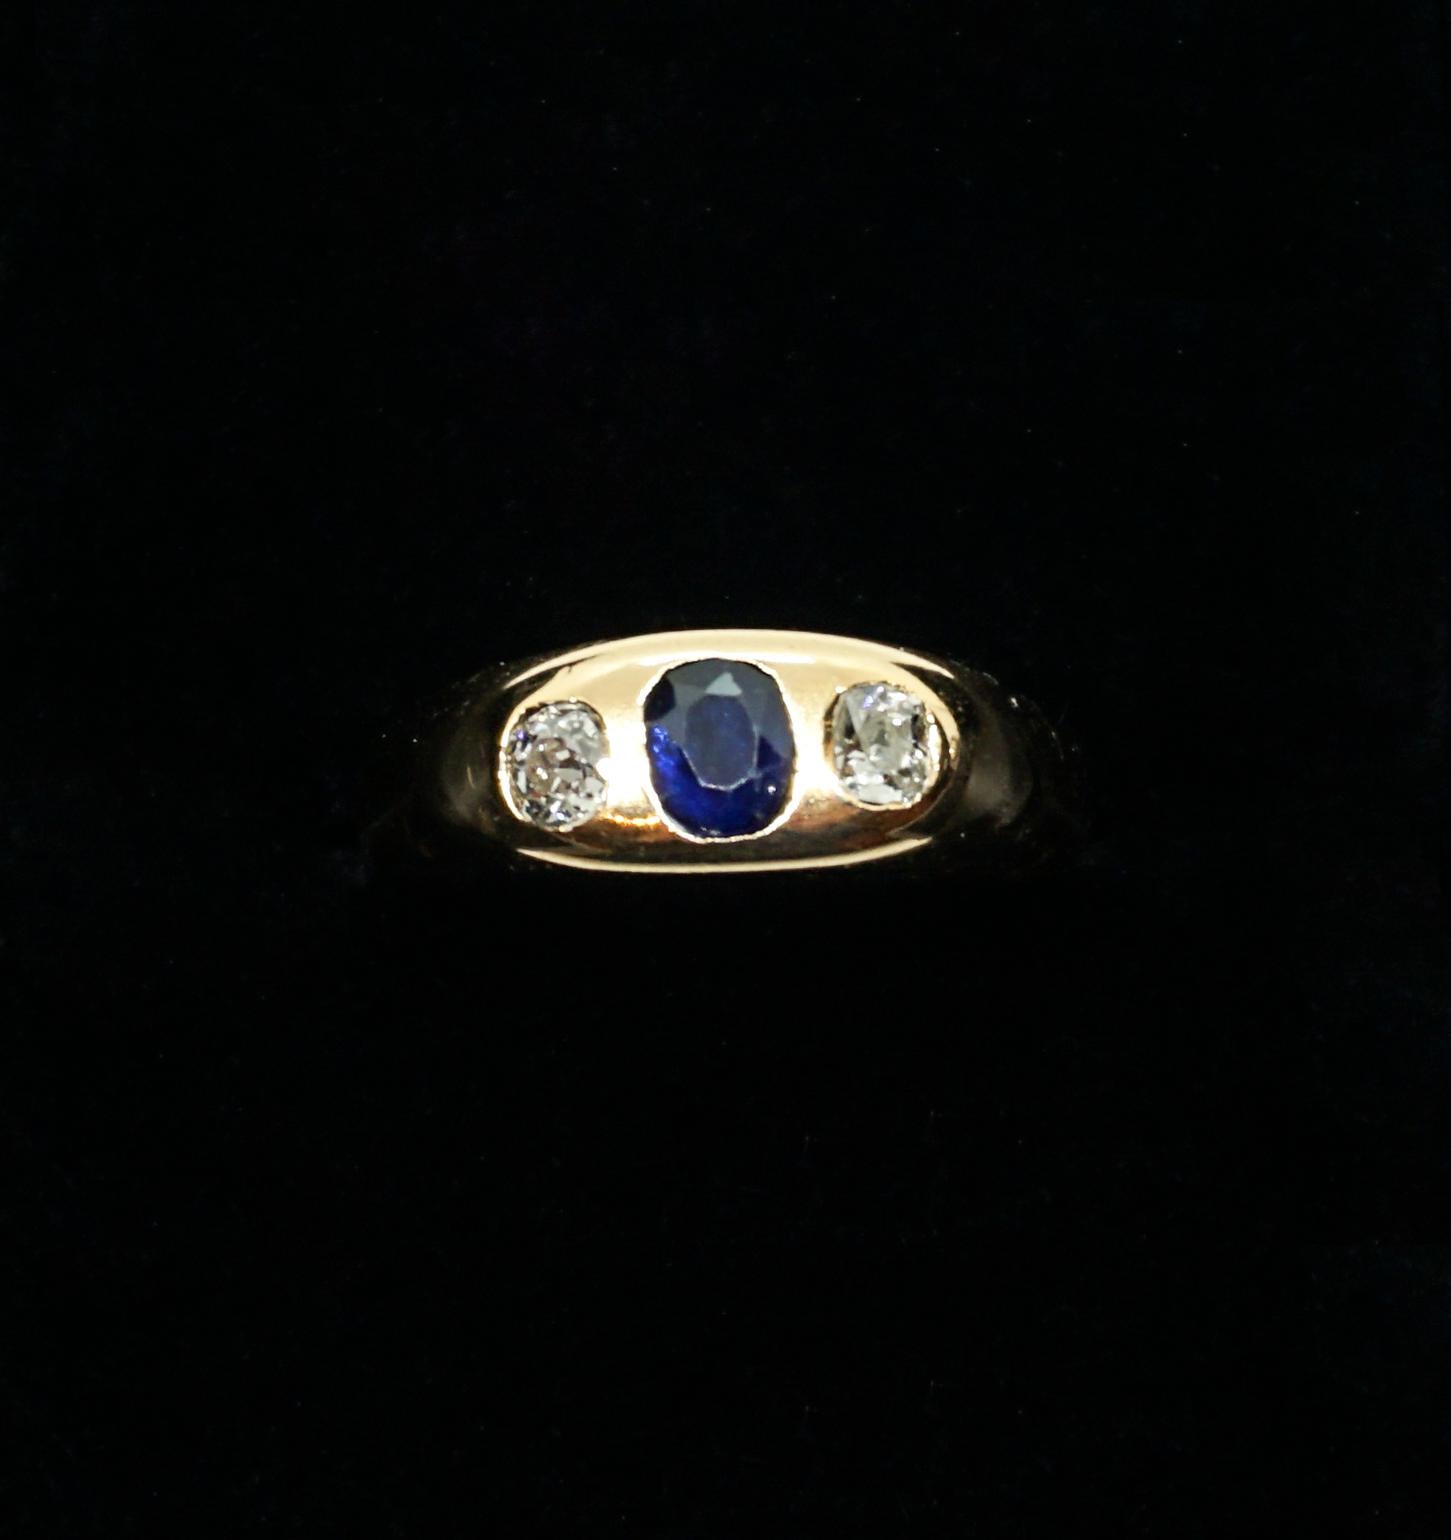 Elegant band ring in 14k red gold, reinforced at the top and set in the center with an inlaid sapphire, approx. 0.40 ct, flanked by two old-cut diamonds, together approx. 0.50 ct.
Captivating in its simplicity.

Vienna, circa 1900

head measuring 